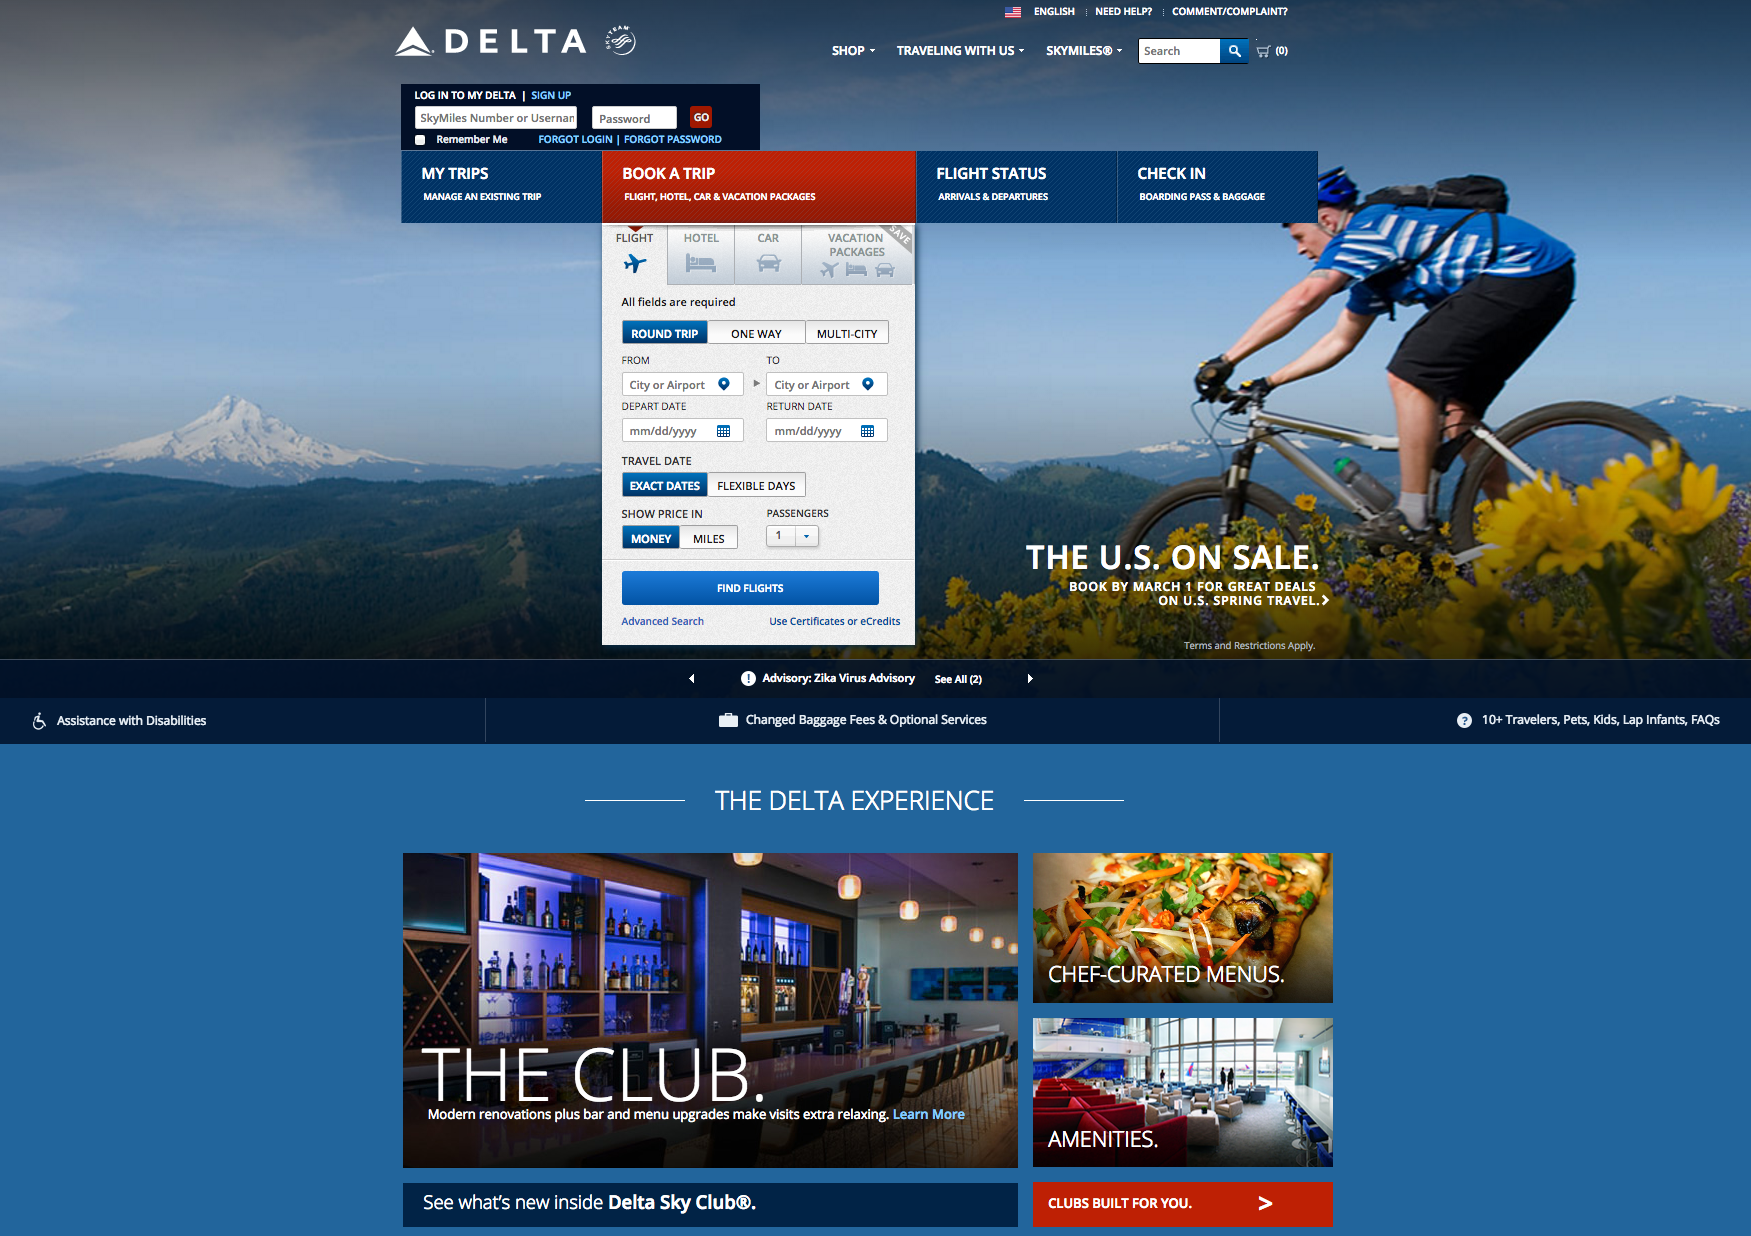 How do you print your Delta Air Lines boarding pass?